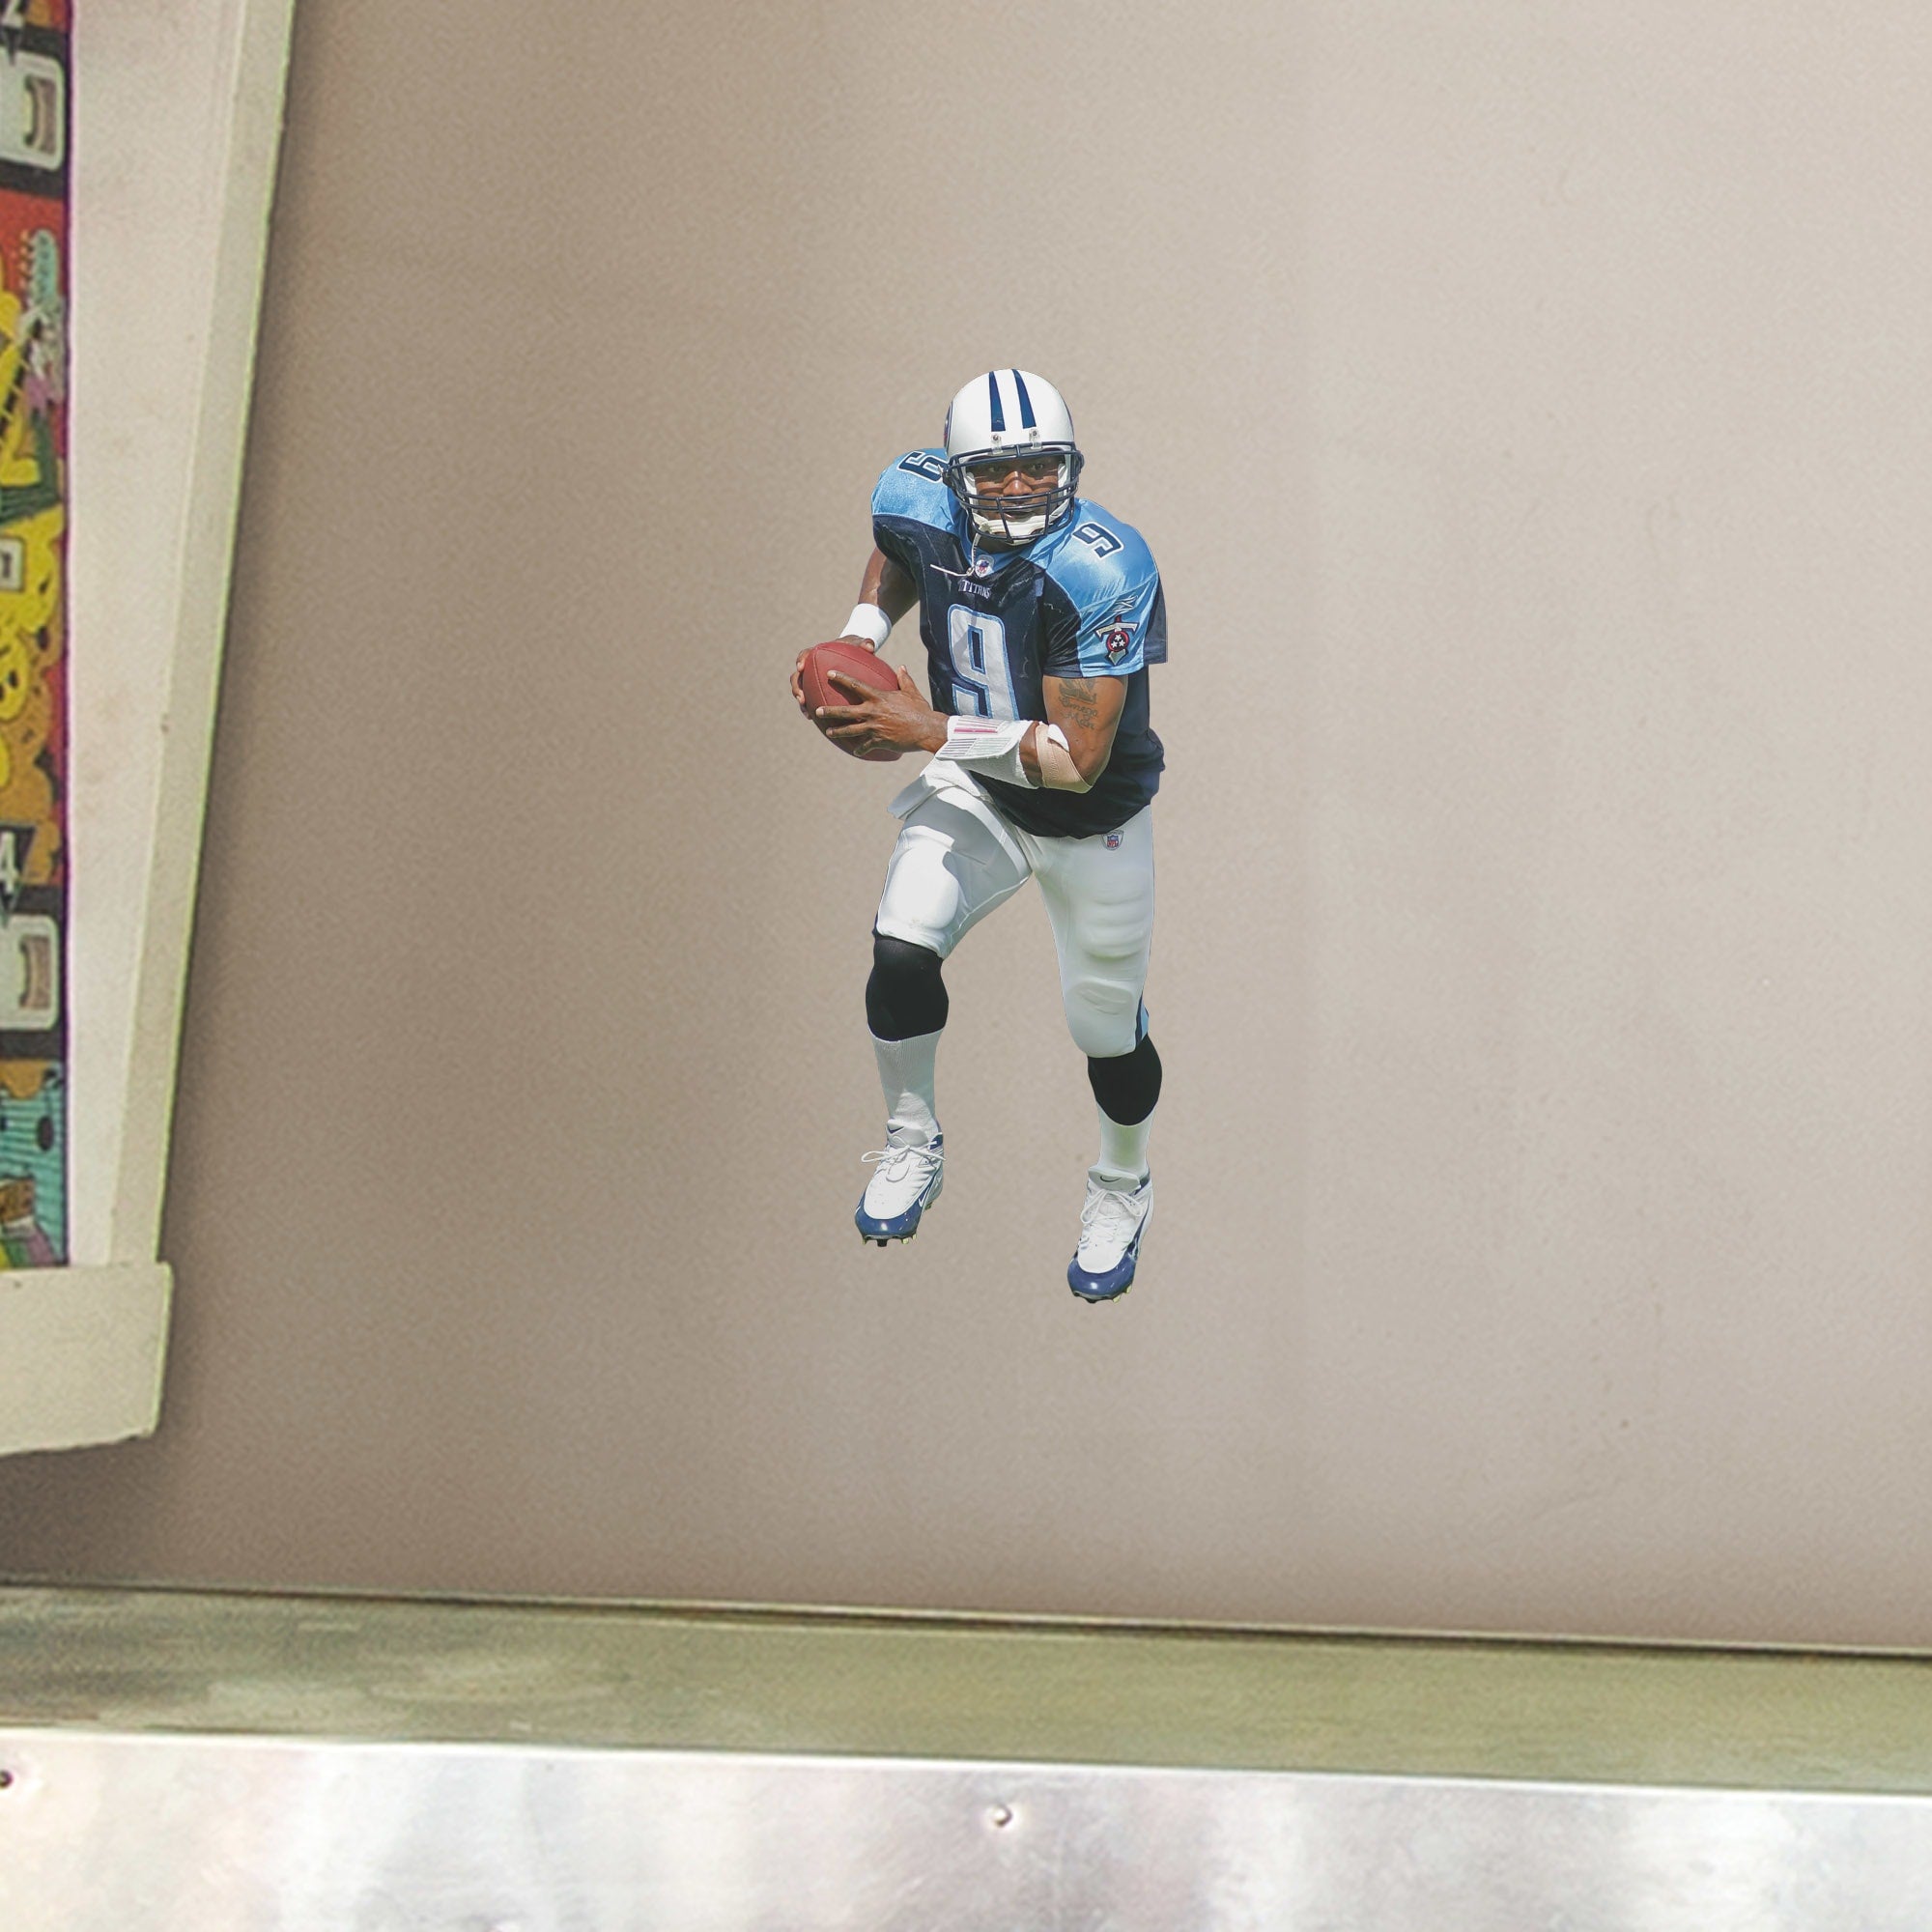 Steve McNair for Tennessee Titans: Titans Legend - Officially Licensed NFL Removable Wall Decal Large by Fathead | Vinyl